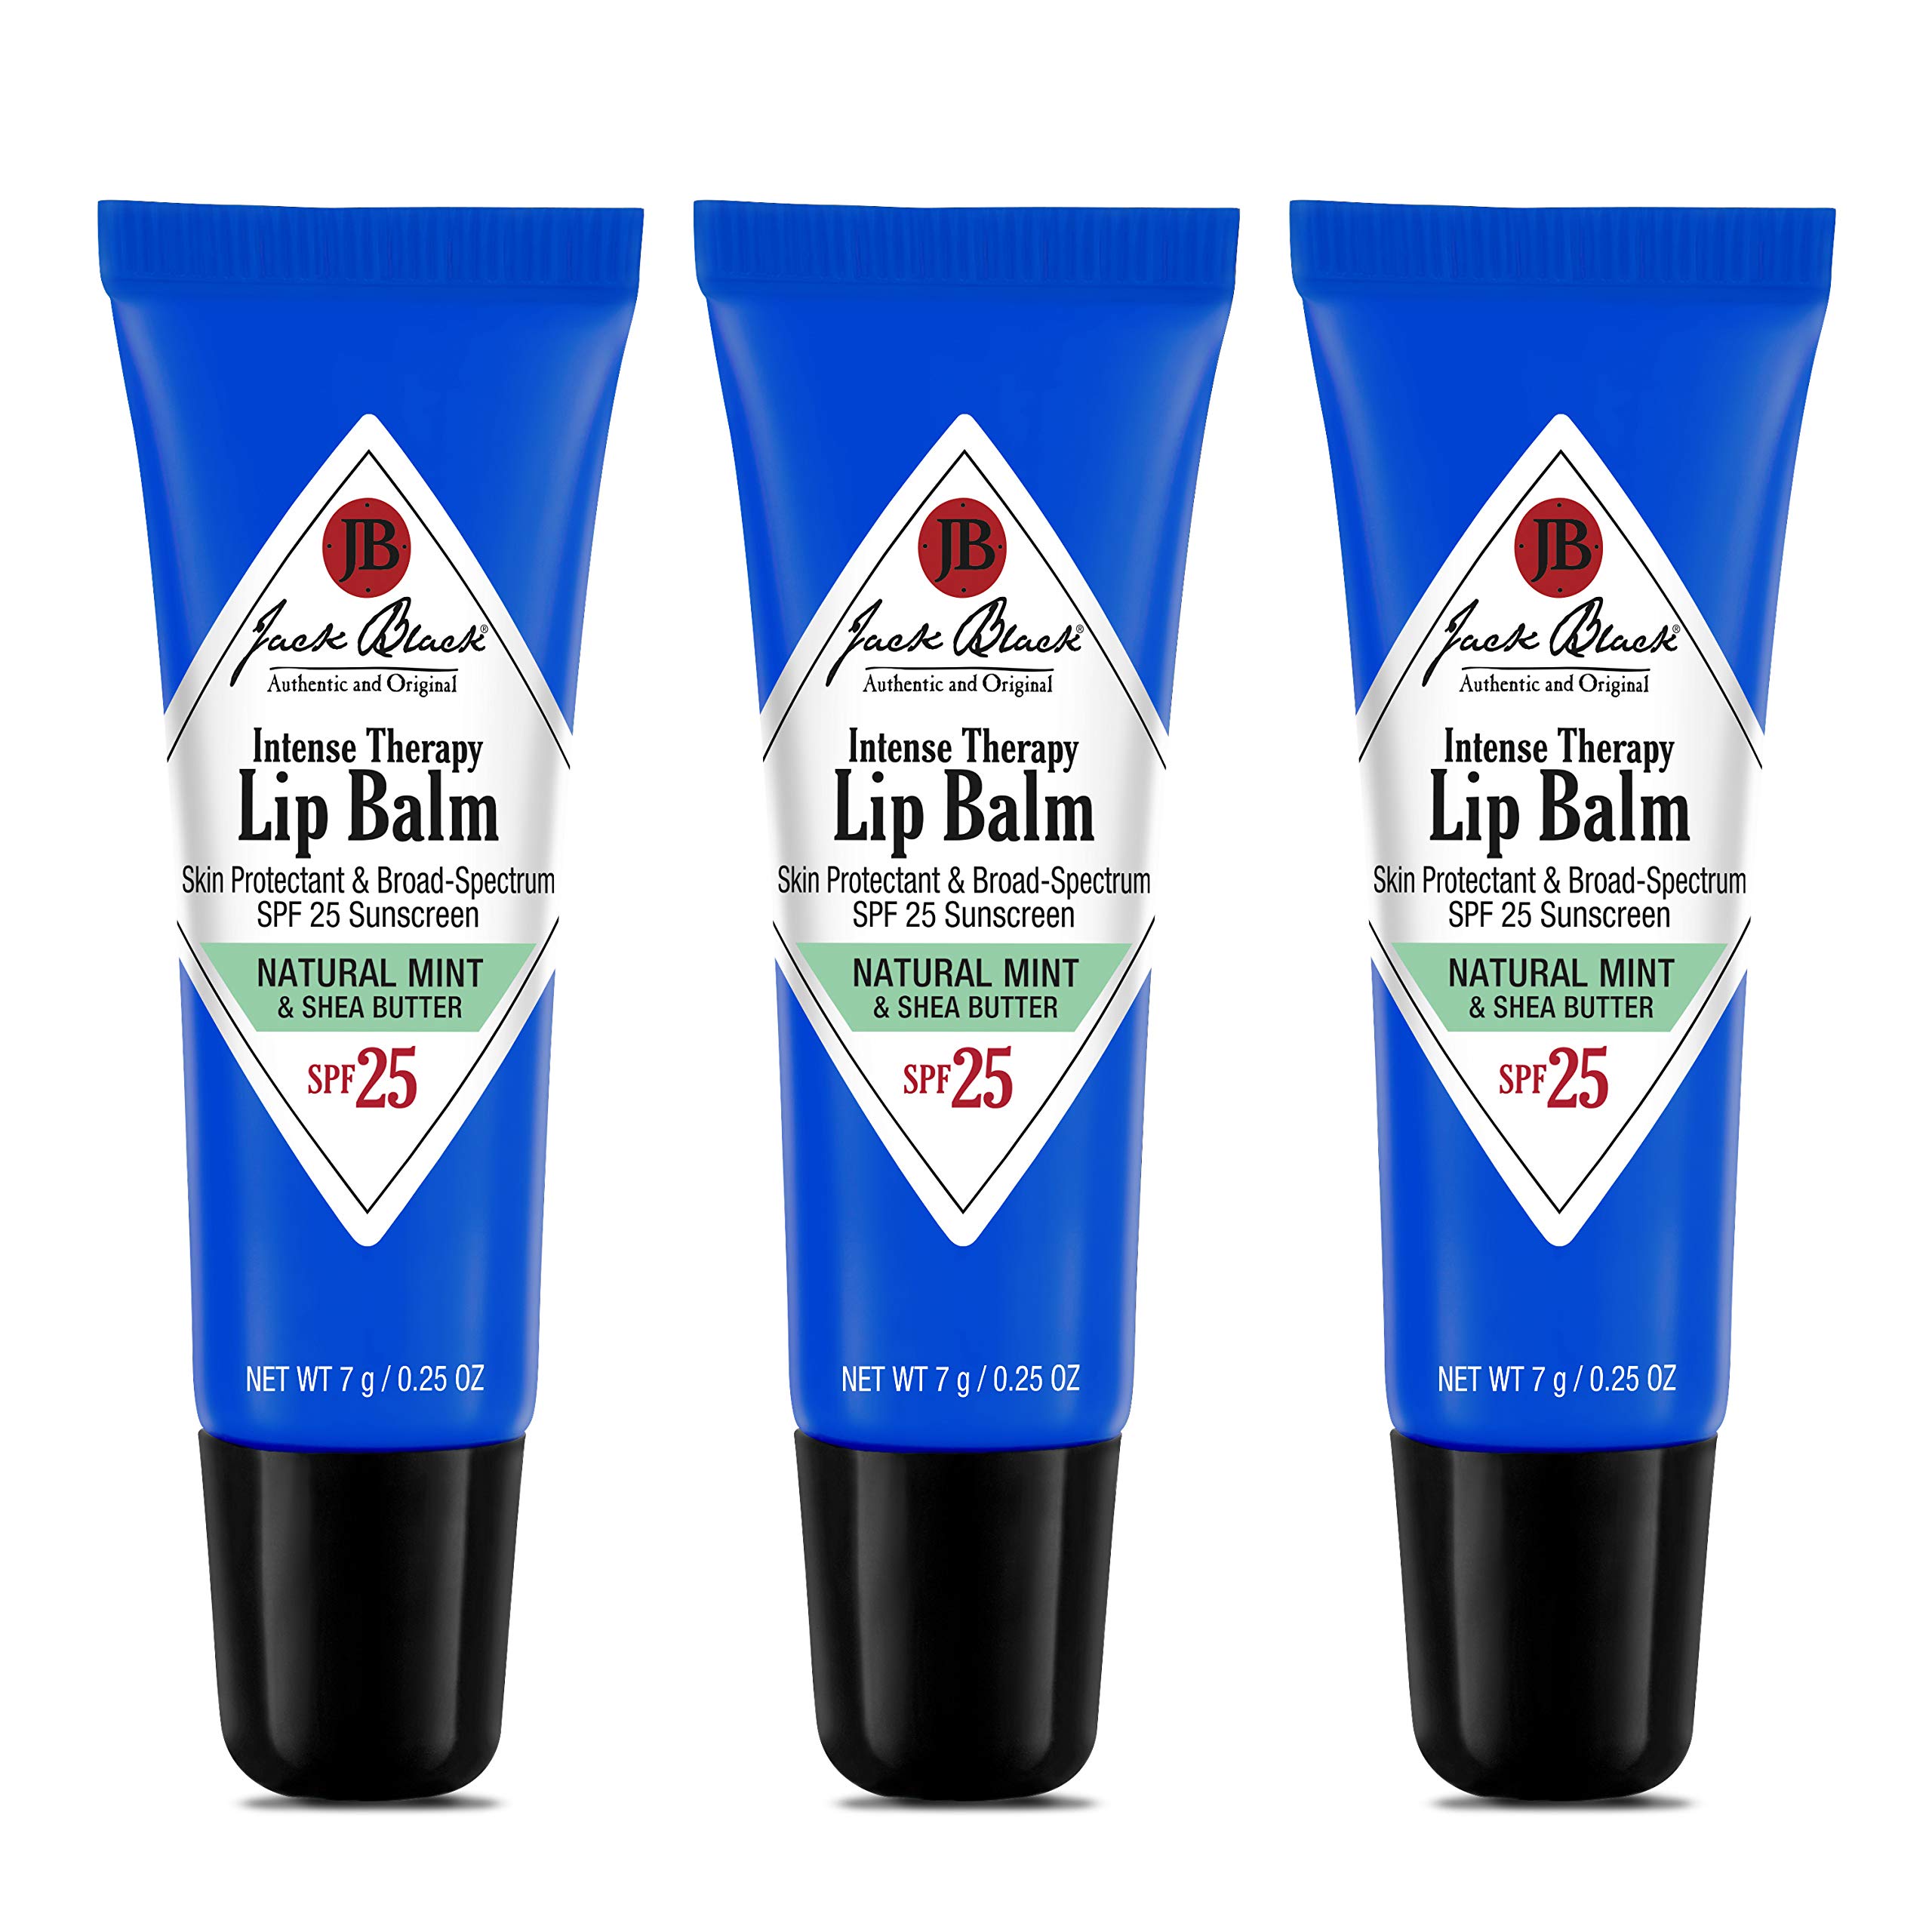 Jack Black Lip Balm Pack of 3, List Price is $24, Now Only $16, You Save $8